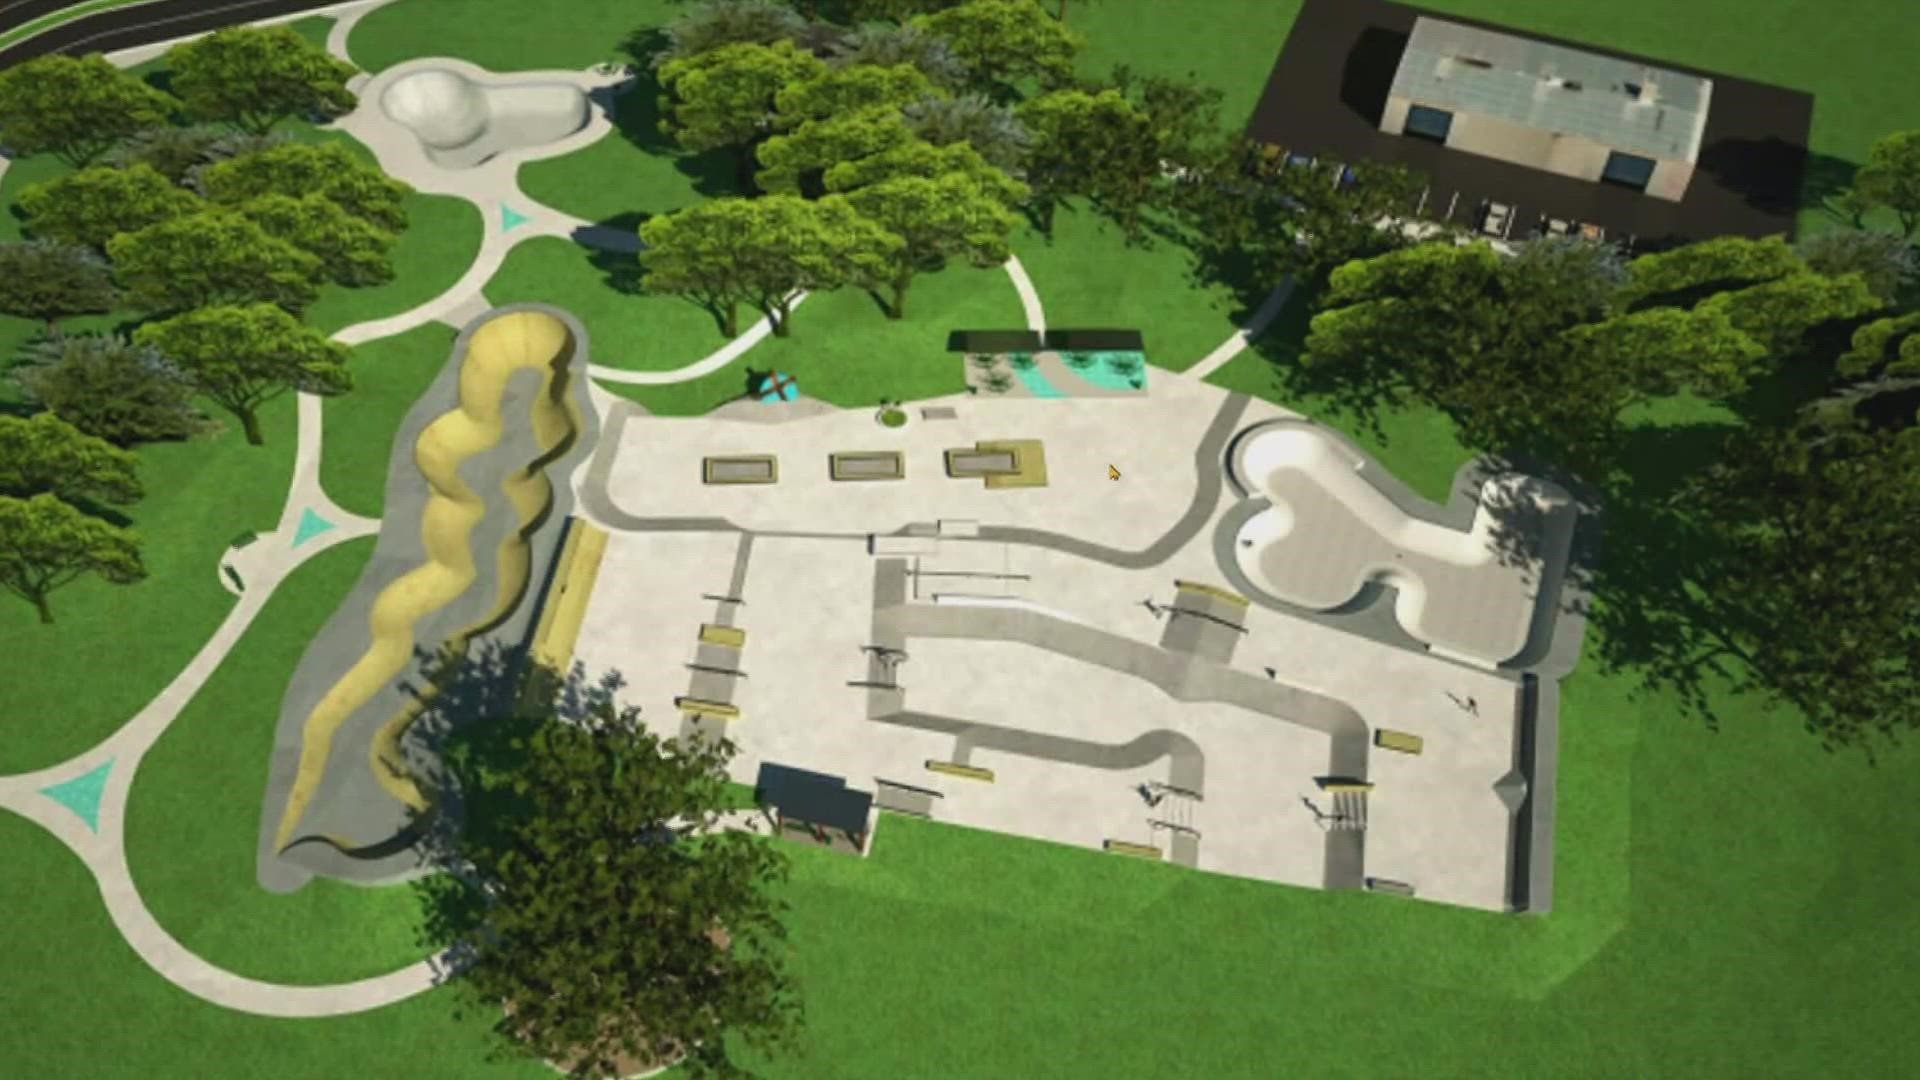 The skate park is planned to be located at Bachman Park.